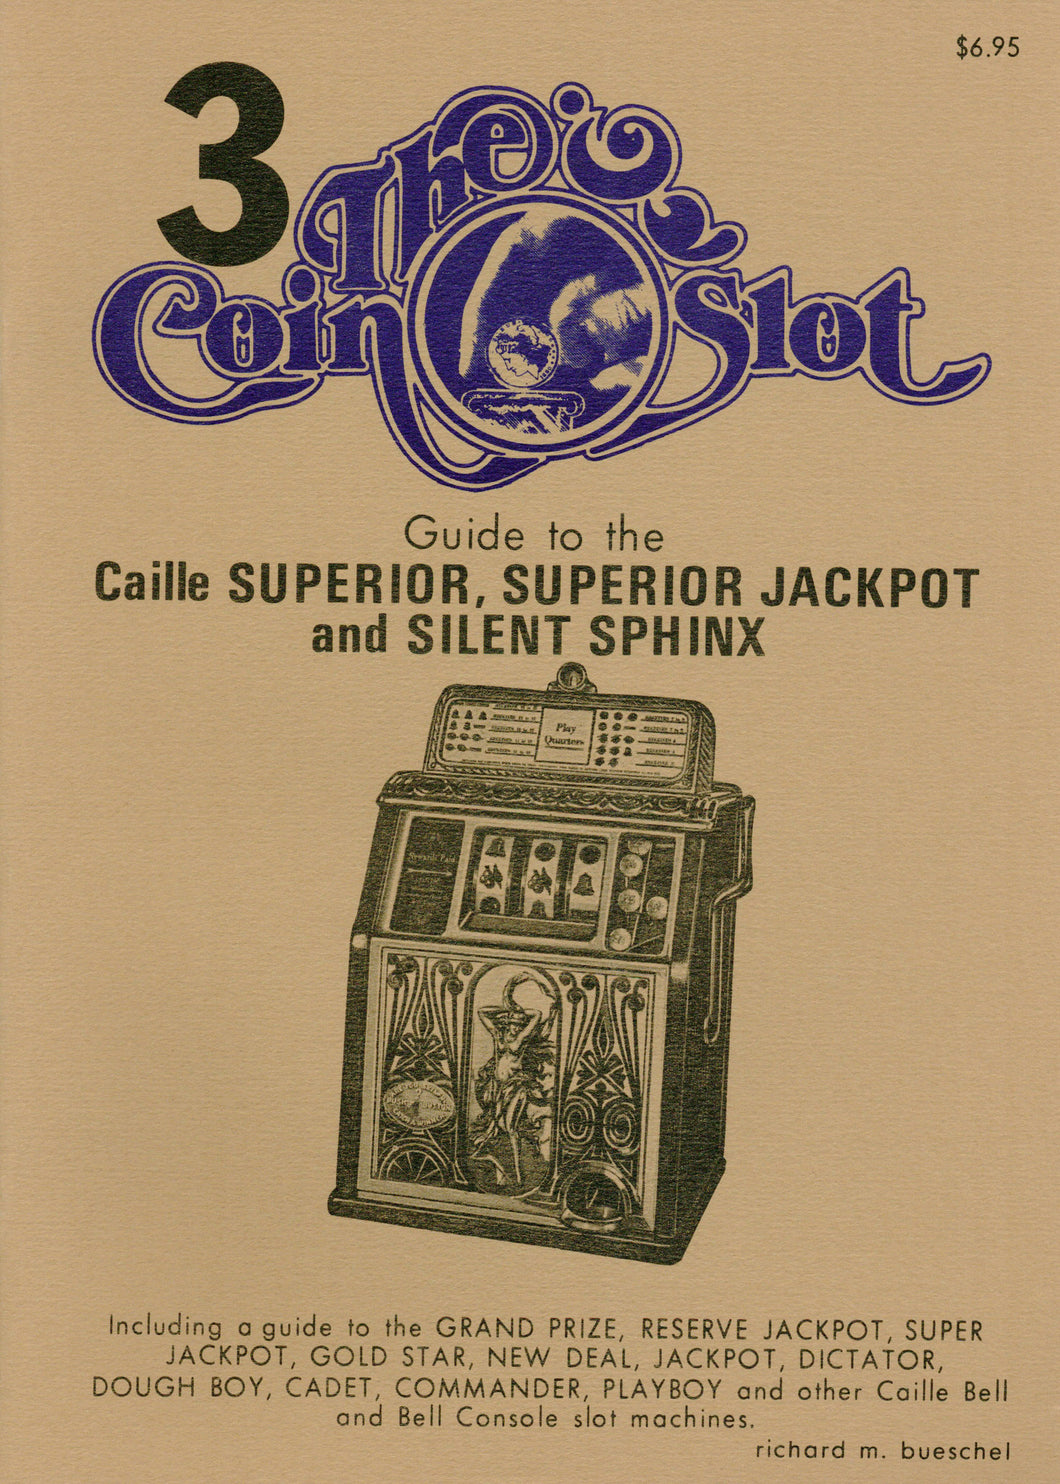 Coin Slot # 3. Guide to the Caille Superior, Superior Jackpot and Silent Sphinx